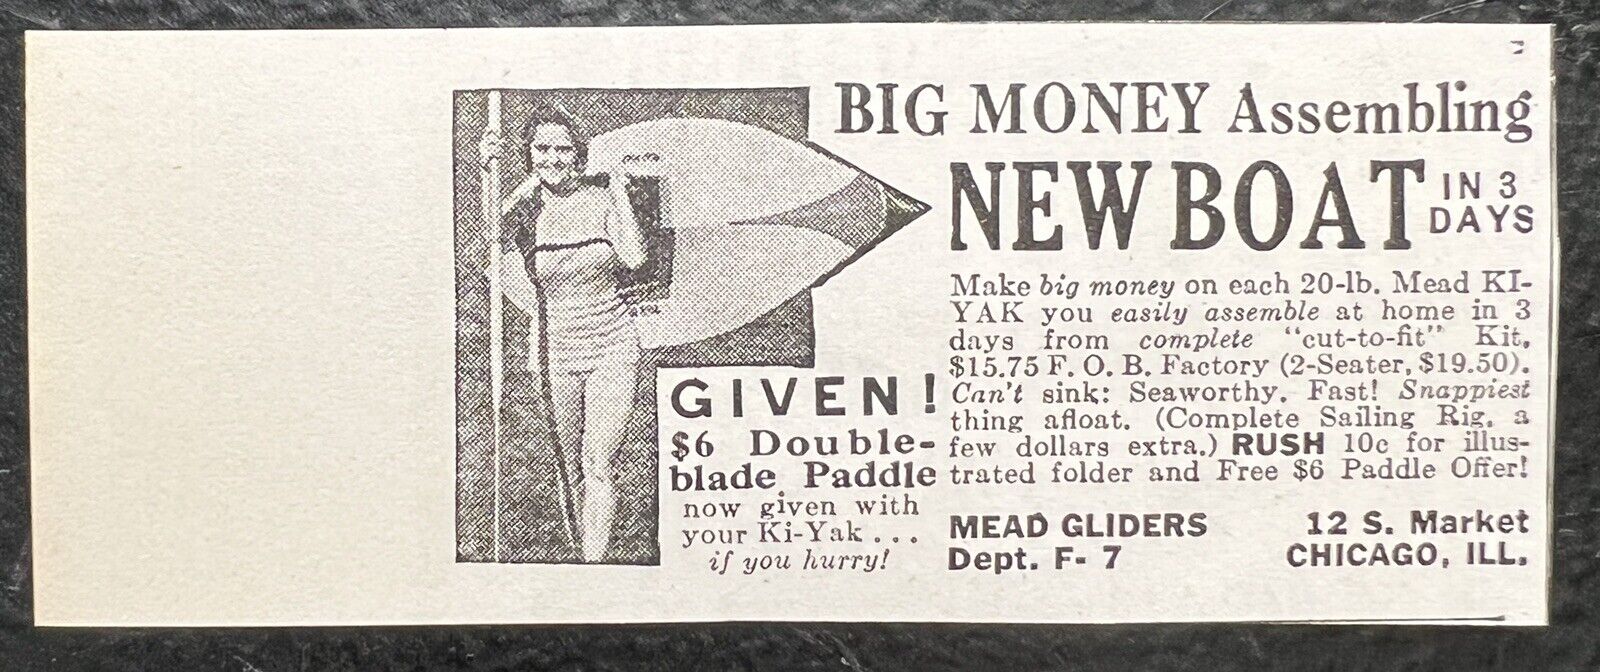 Mead Gliders Big Money Assembling New Boat Chicago IL 1934 Advertising Print